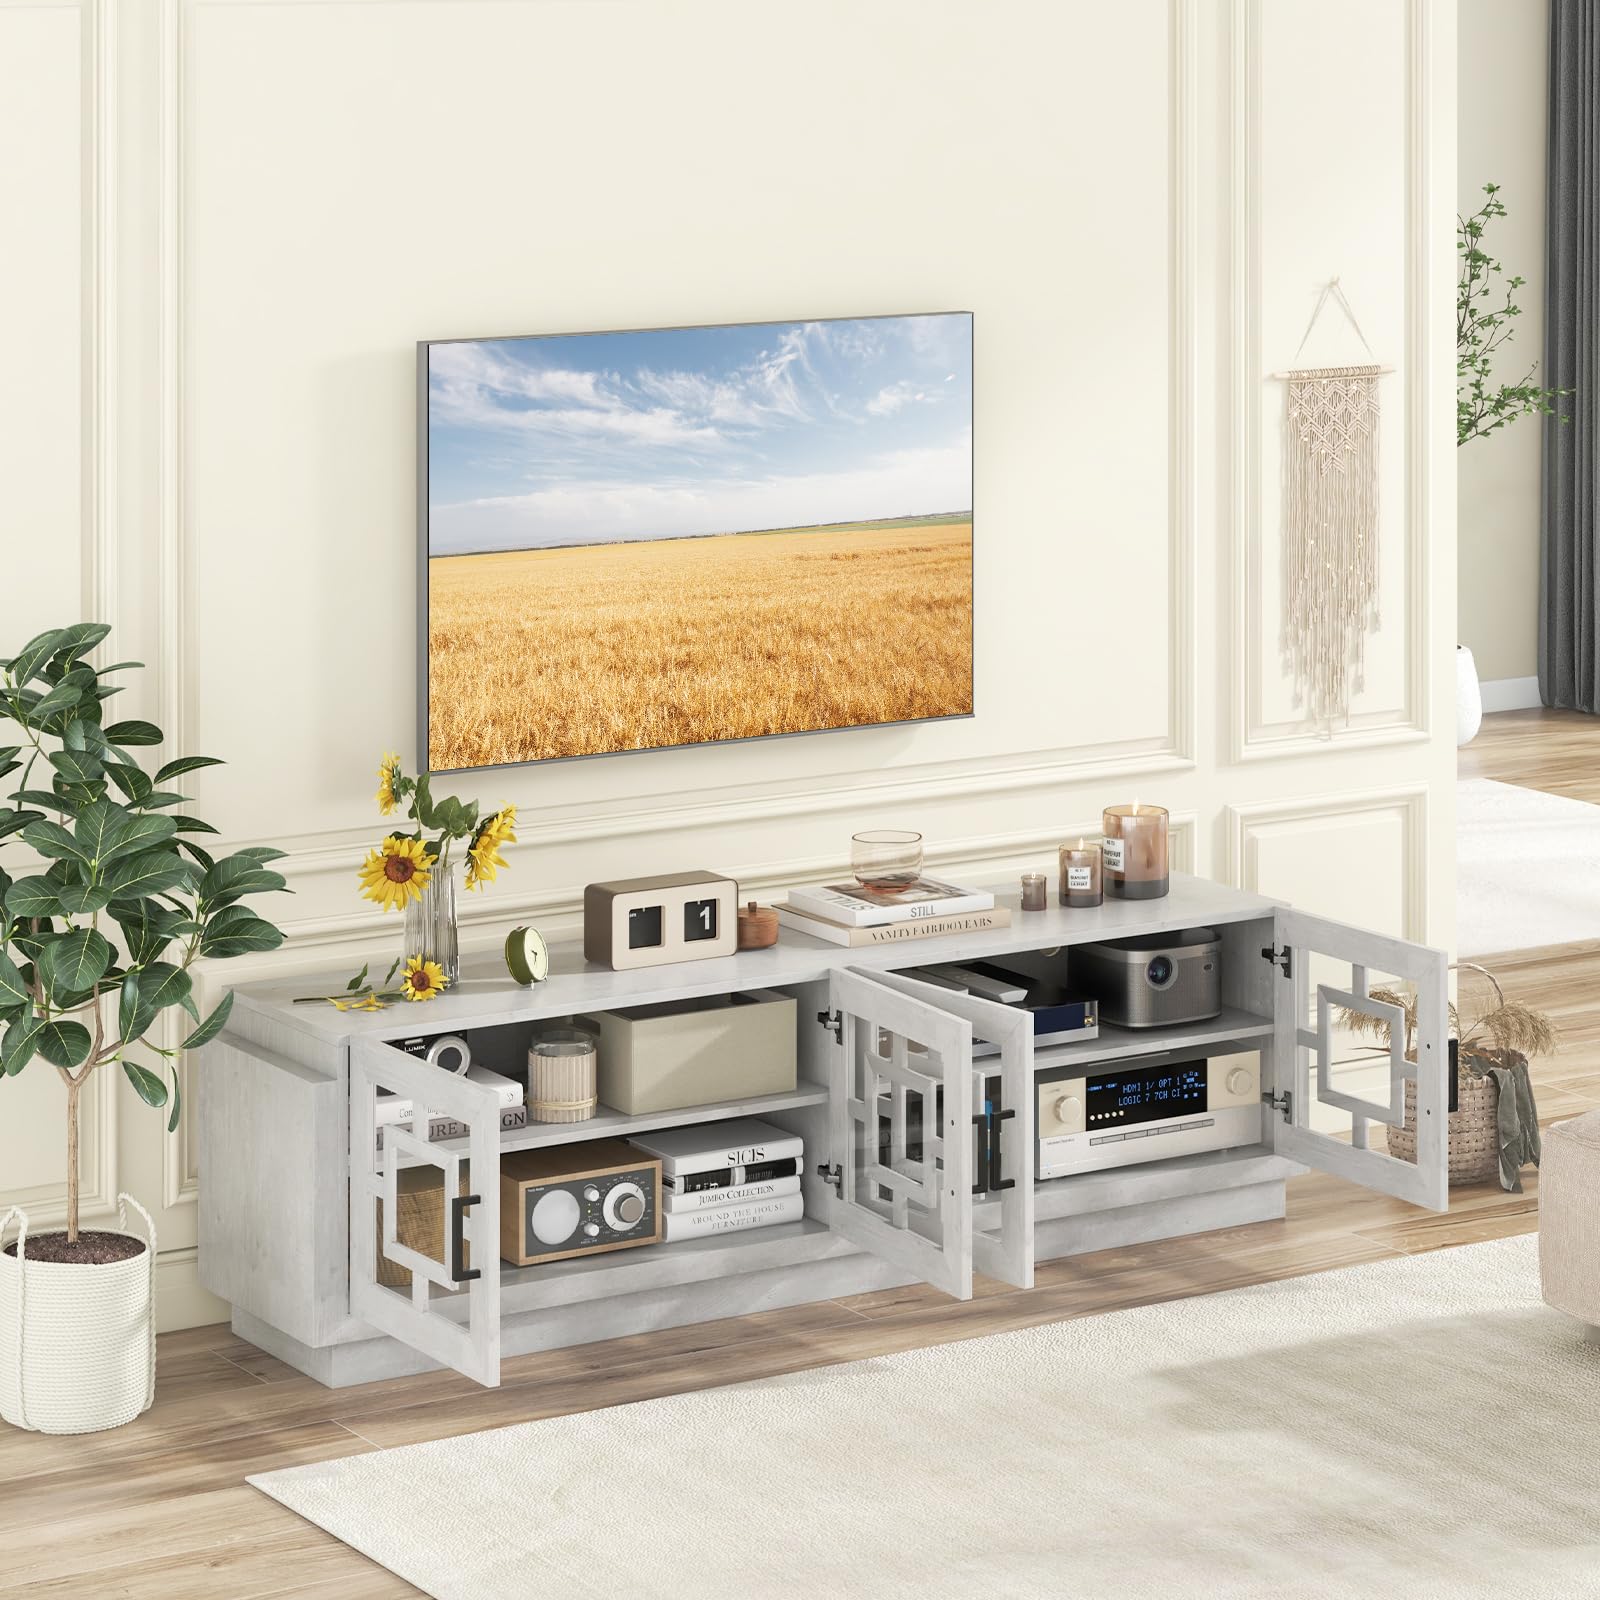 Giantex Farmhouse TV Stand for TVs up to 75”, 4-Door Glass Entertainment Center with 2 Cabinets